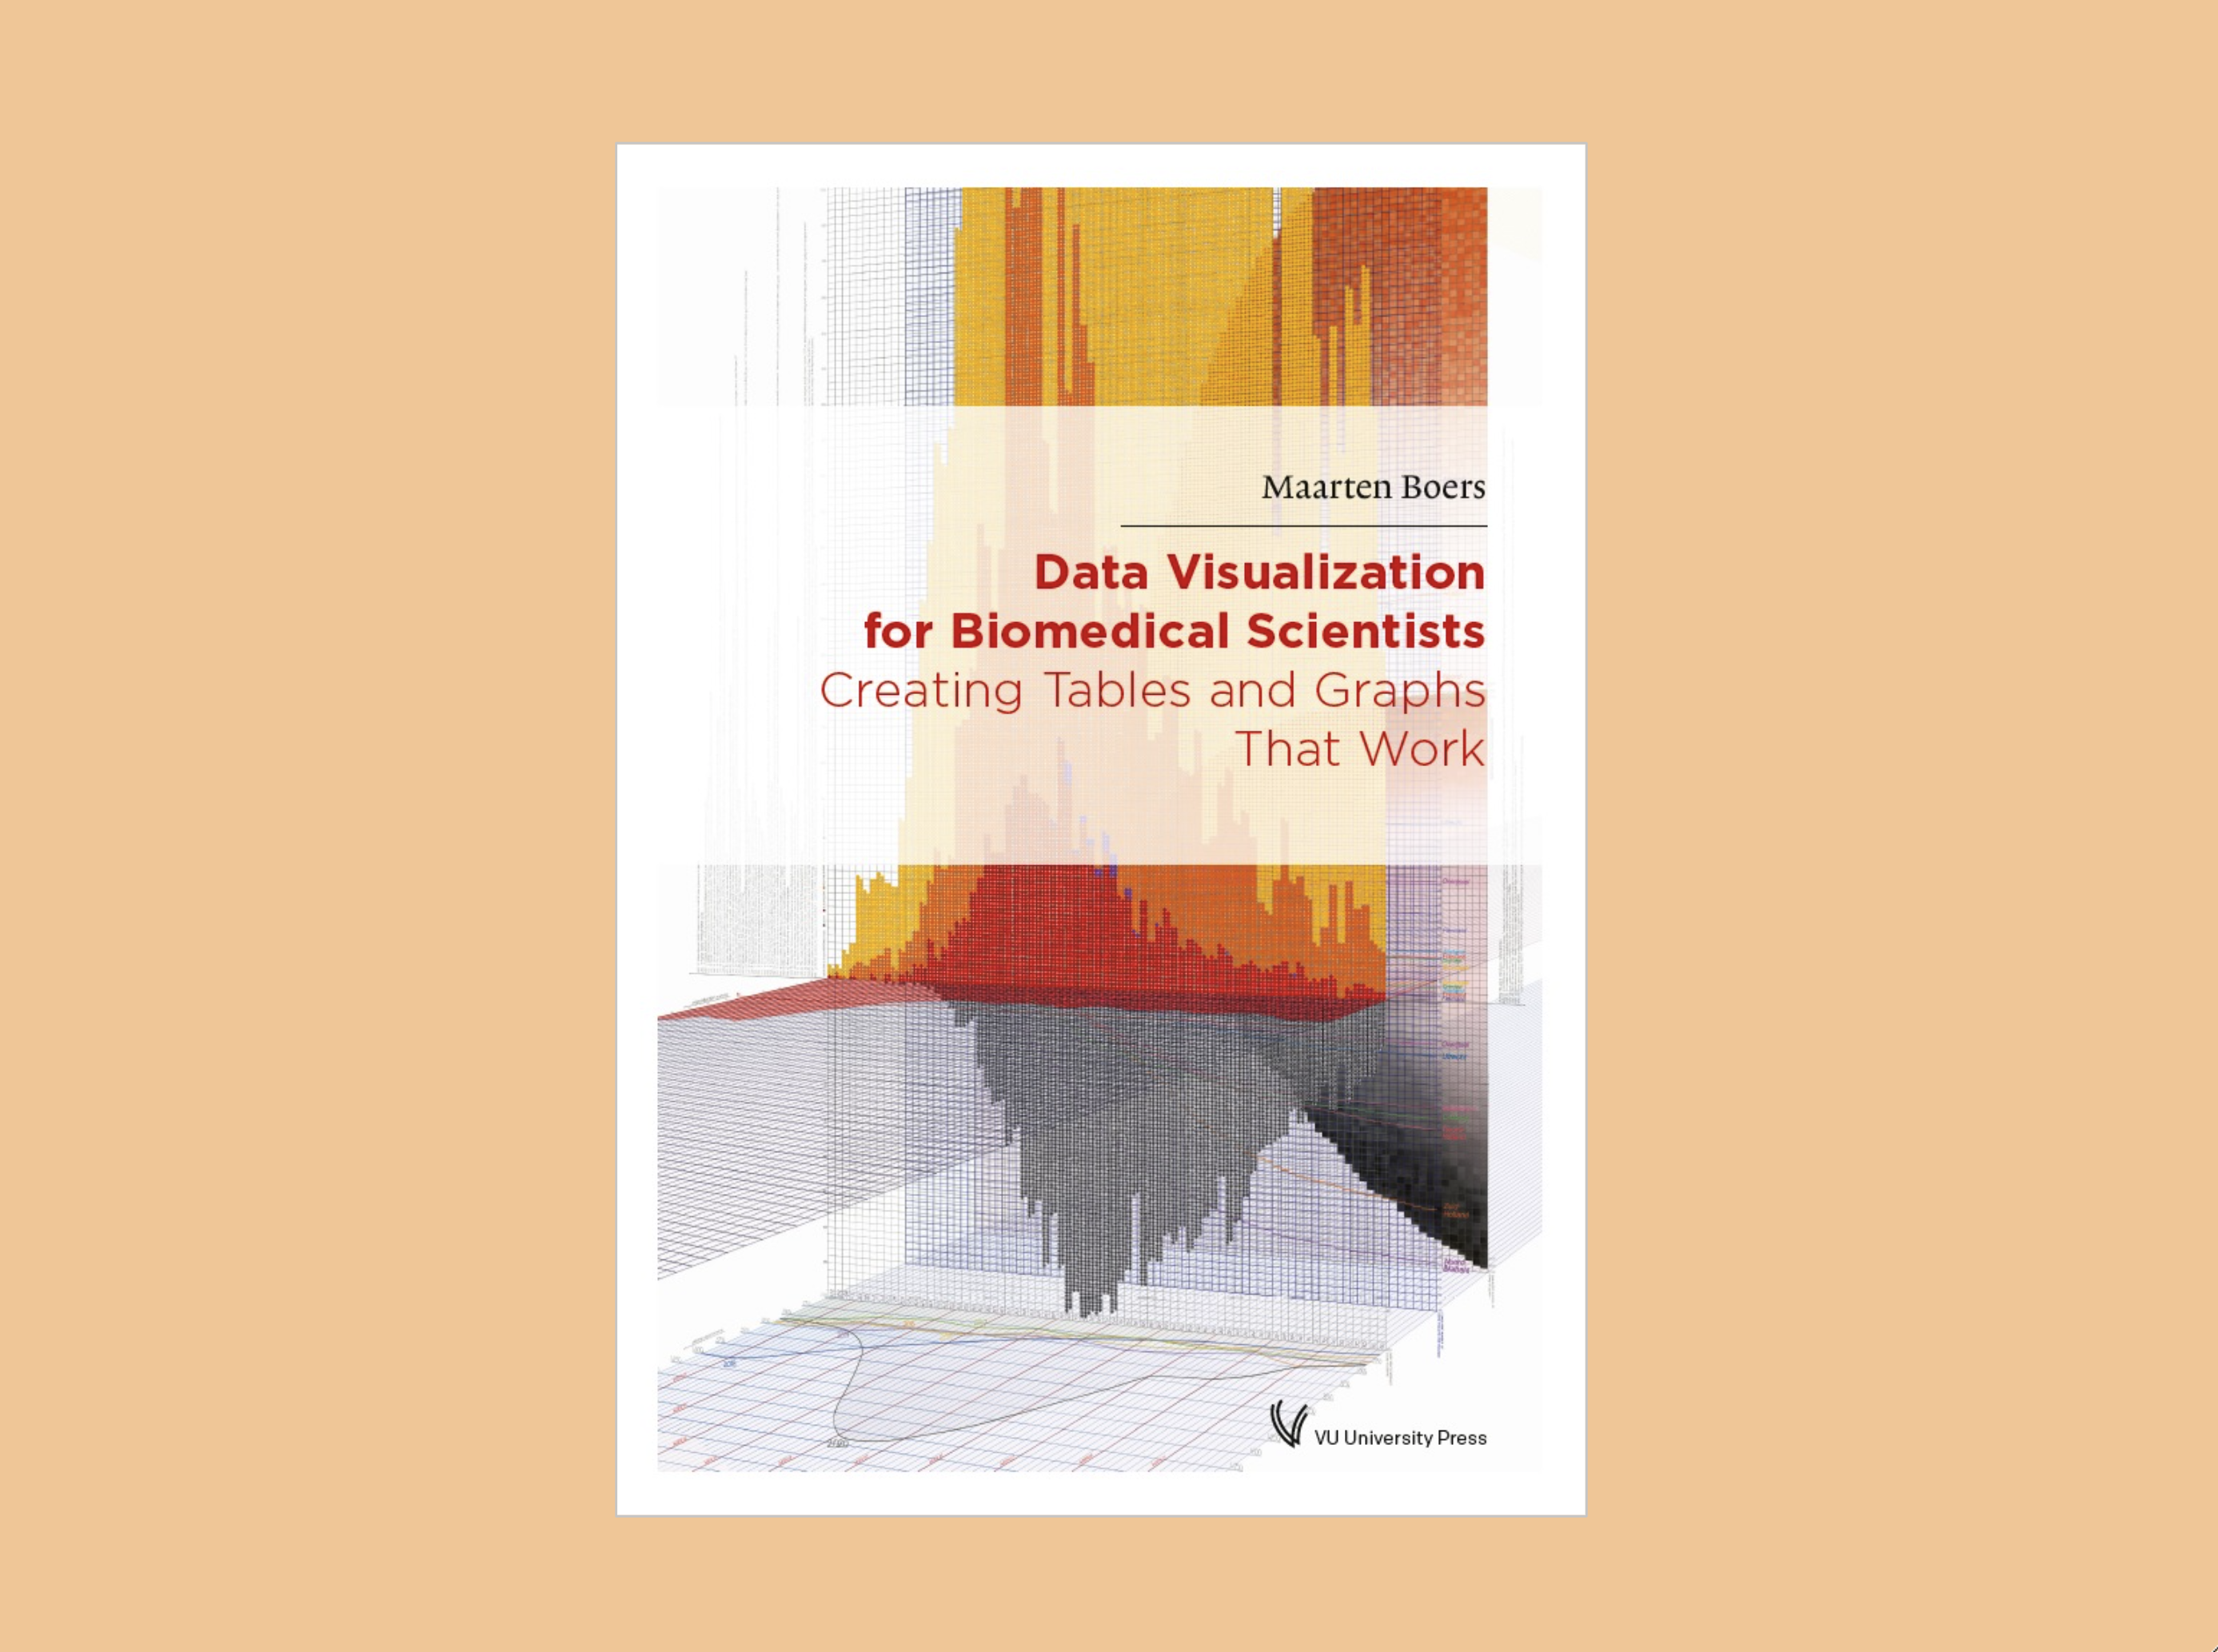 The front cover of Maarten Boers’s Data Visualization for Biomedical Scientists: Creating Tables and Graphs That Work, featuring a data visualization entitled “First wave covid-19” by Gert Jan Kocken which abstractly portrays data from the first wave of the COVID-19 pandemic.